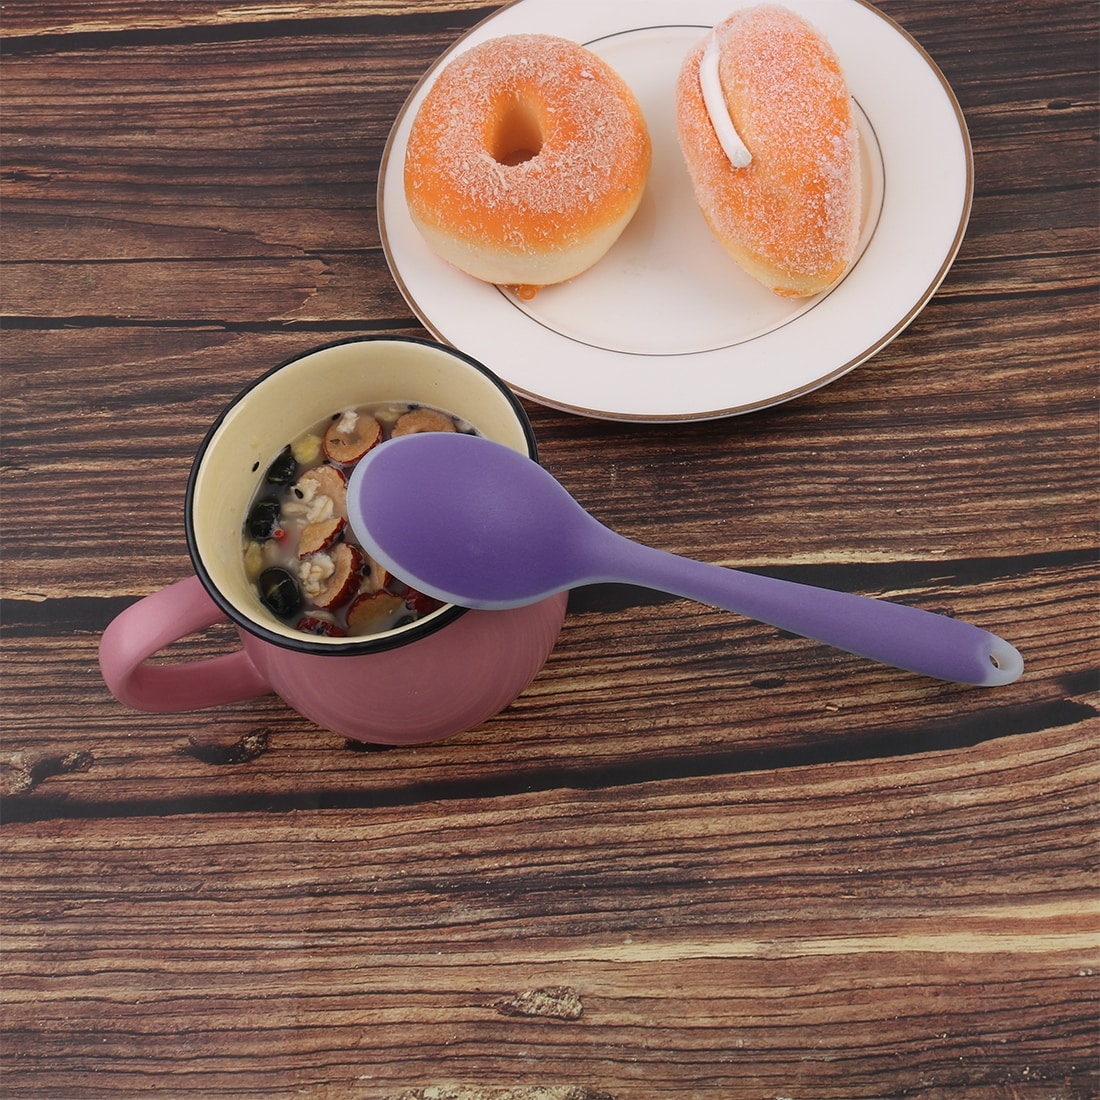 https://ak1.ostkcdn.com/images/products/is/images/direct/63adc61cd28417b21de4054c7f8234483968fadc/Silicone-Dinner-Dessert-Spoon-Serving-Eating-Utensil.jpg